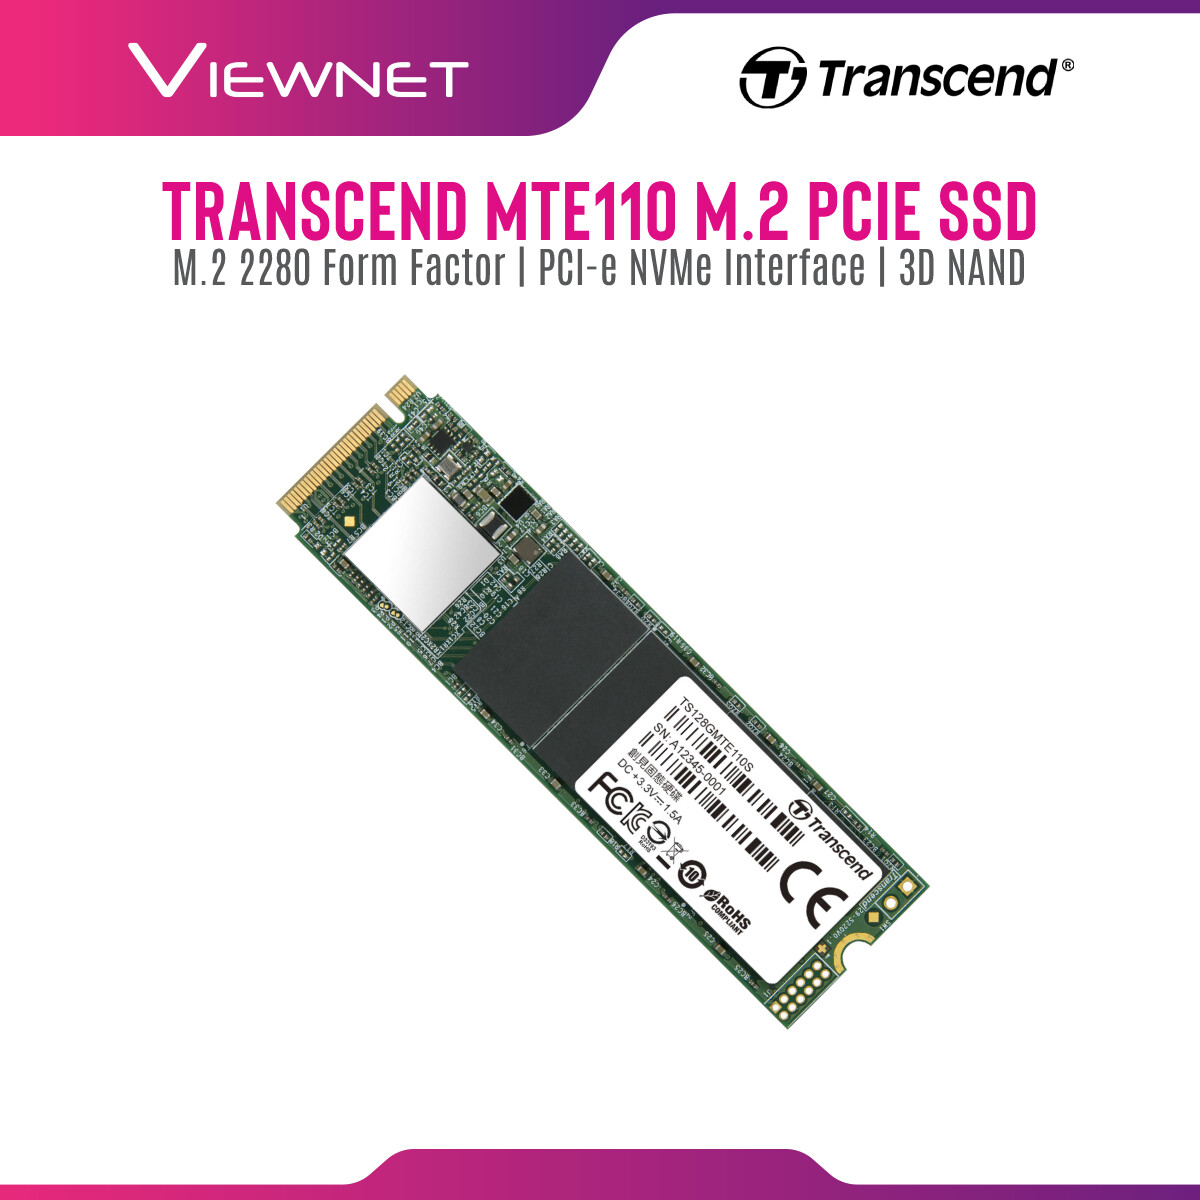 Transcend M.2 PCIE NVME MTE110 128GB/256GB/512GB/1TB Internal SSD Solid State Drives for PC Laptop (TS128GMTE110S/TS256GMTE110S/TS512GMTE110S/TS1TMTE110S)